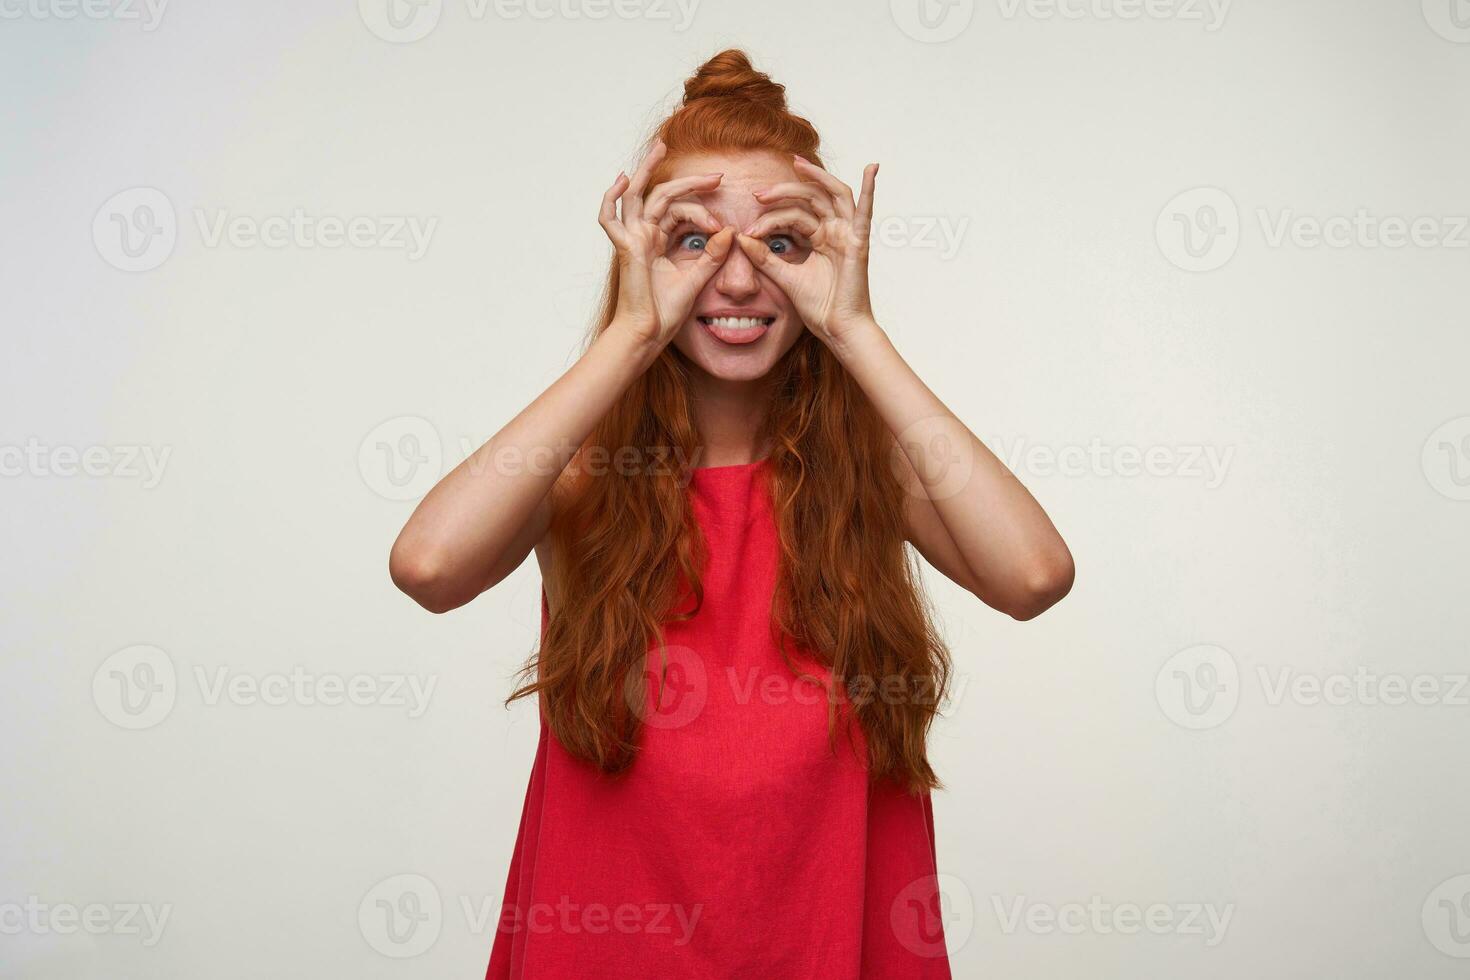 Studio photo of joyful young woman wearing her foxy hair in knot, making ridiculous faces over white background, making eyewear with her hands and showing tongue. Positive emotion facial expression